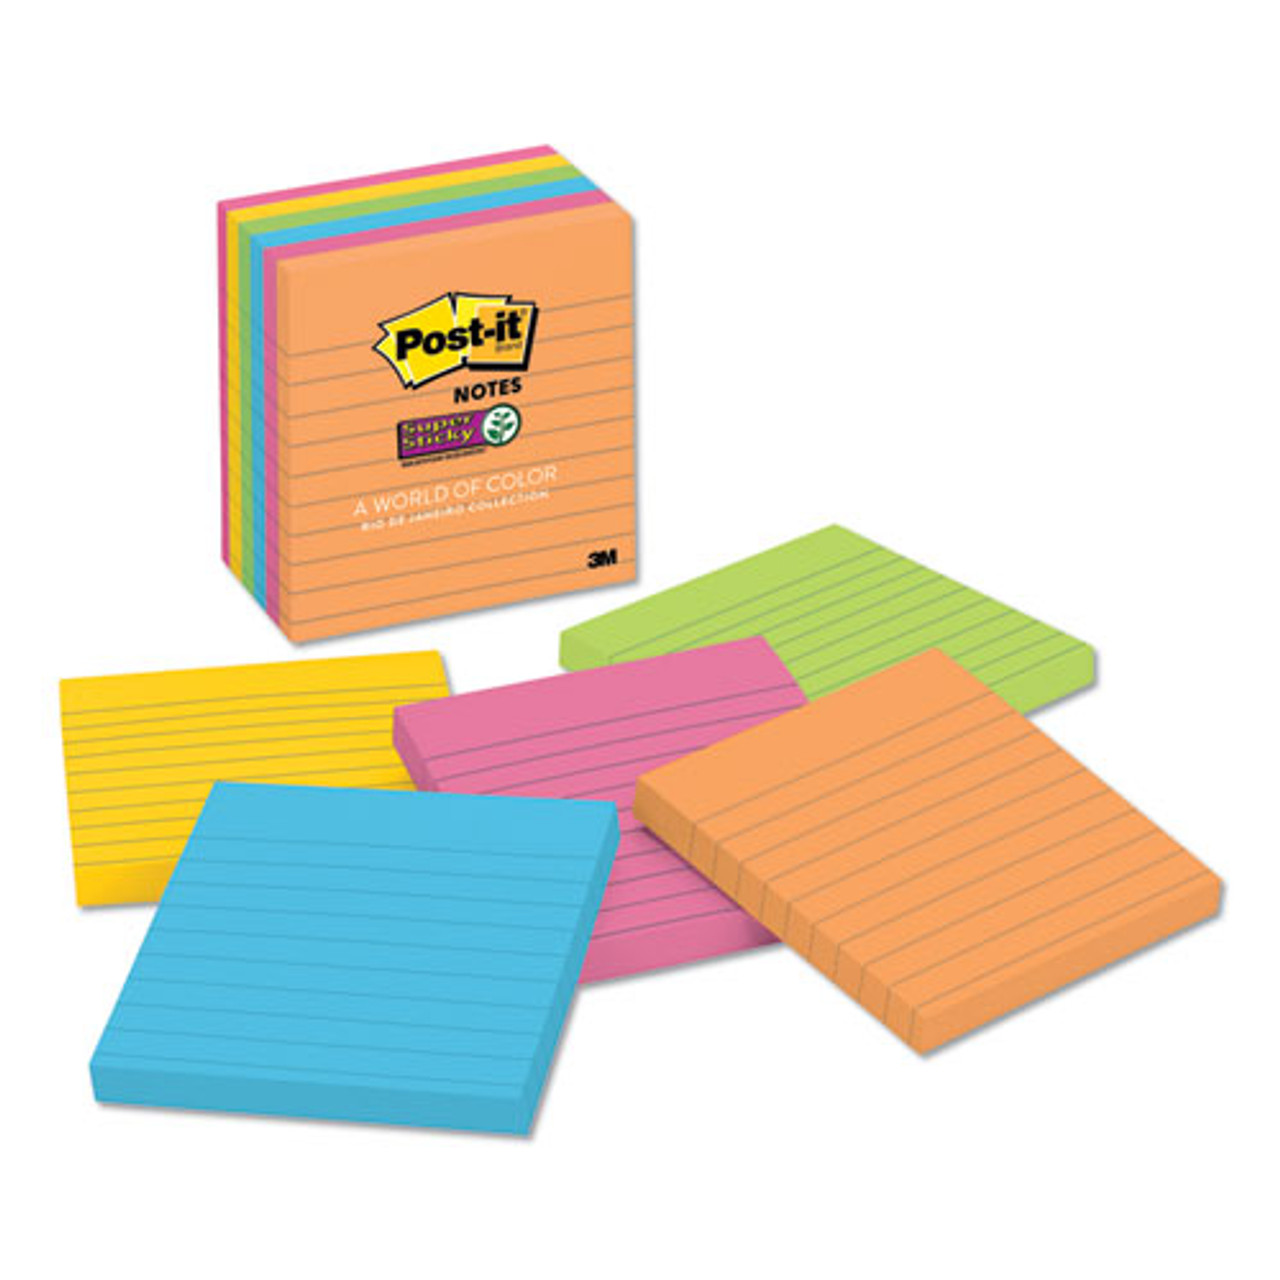 Post-it Notes Super Sticky 675-6SSUC Super Sticky Ultra Notes, 4 x 4, Lined, Five Colors, 6 90-Sheet Pads/Pack